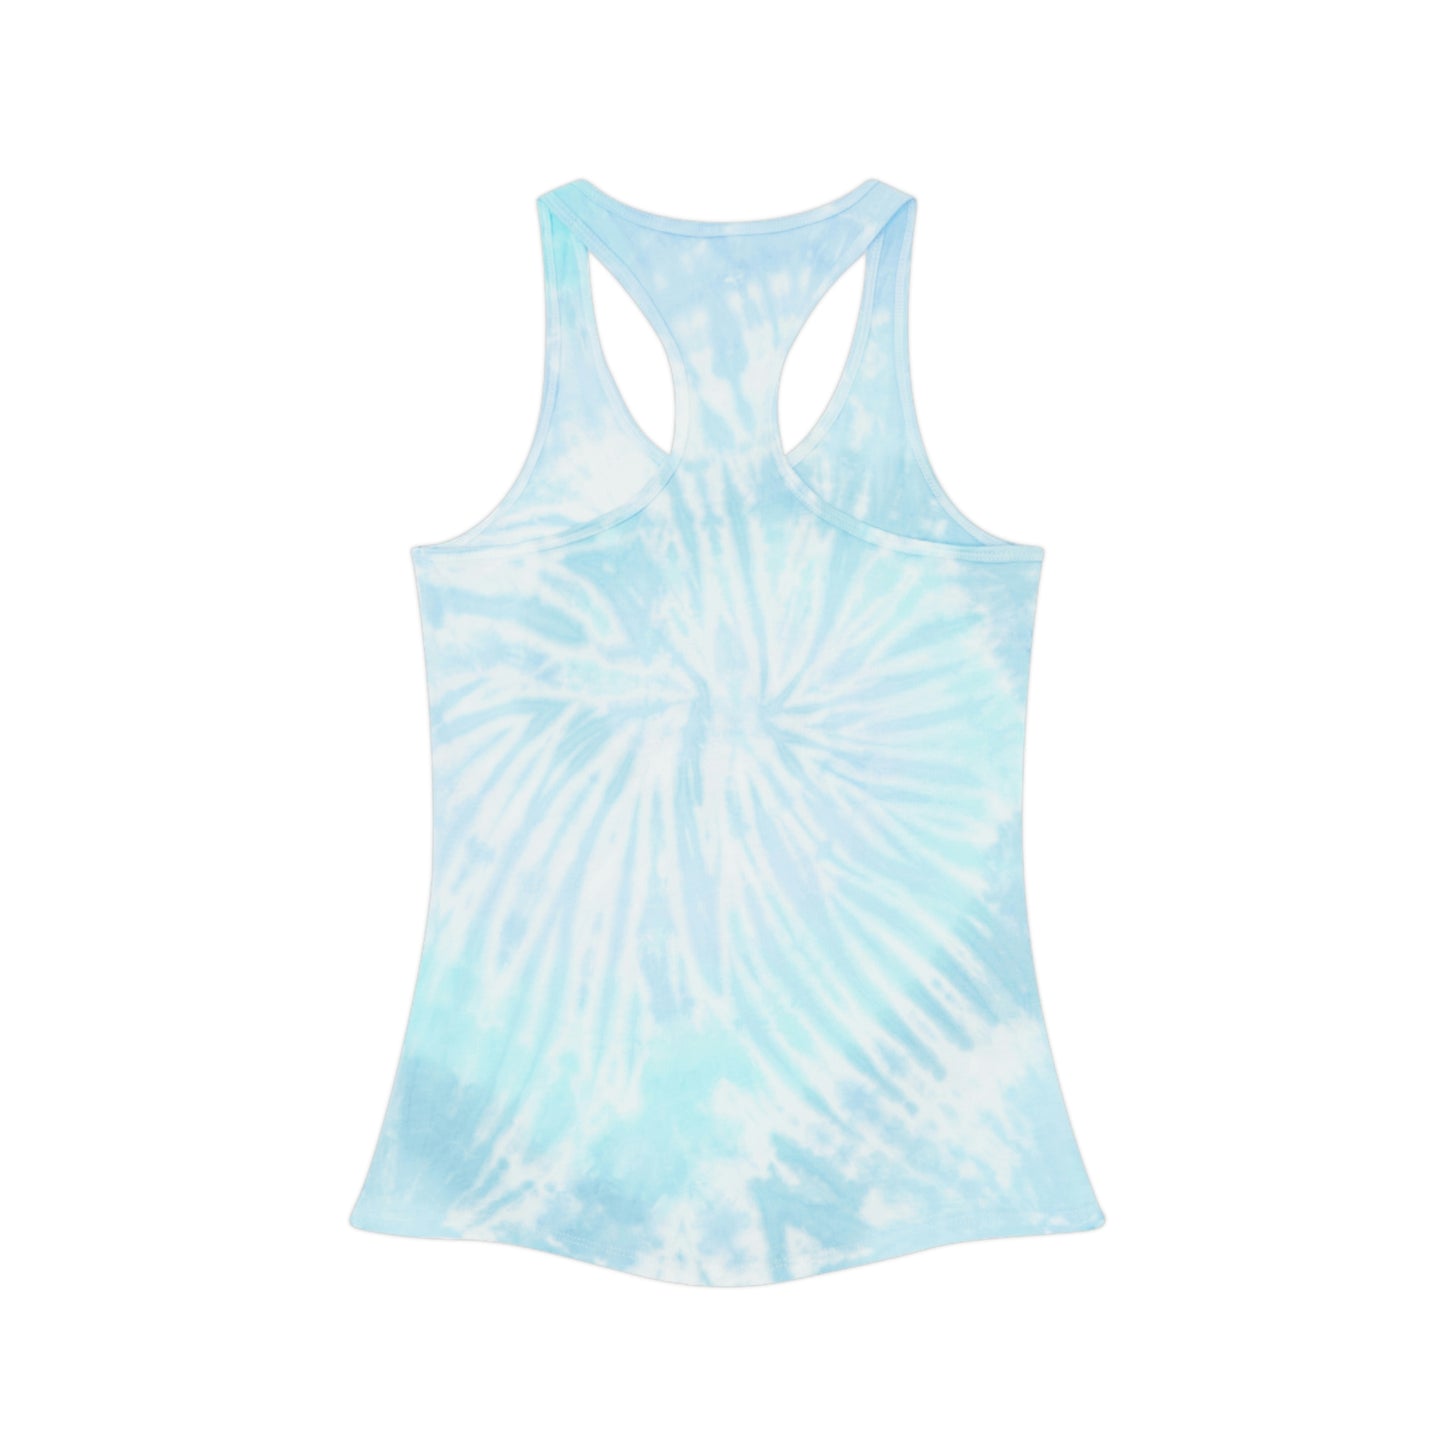 Women's Tie Dye Racerback Tank Top, South Tiger Classic (Multiple Colors Available)